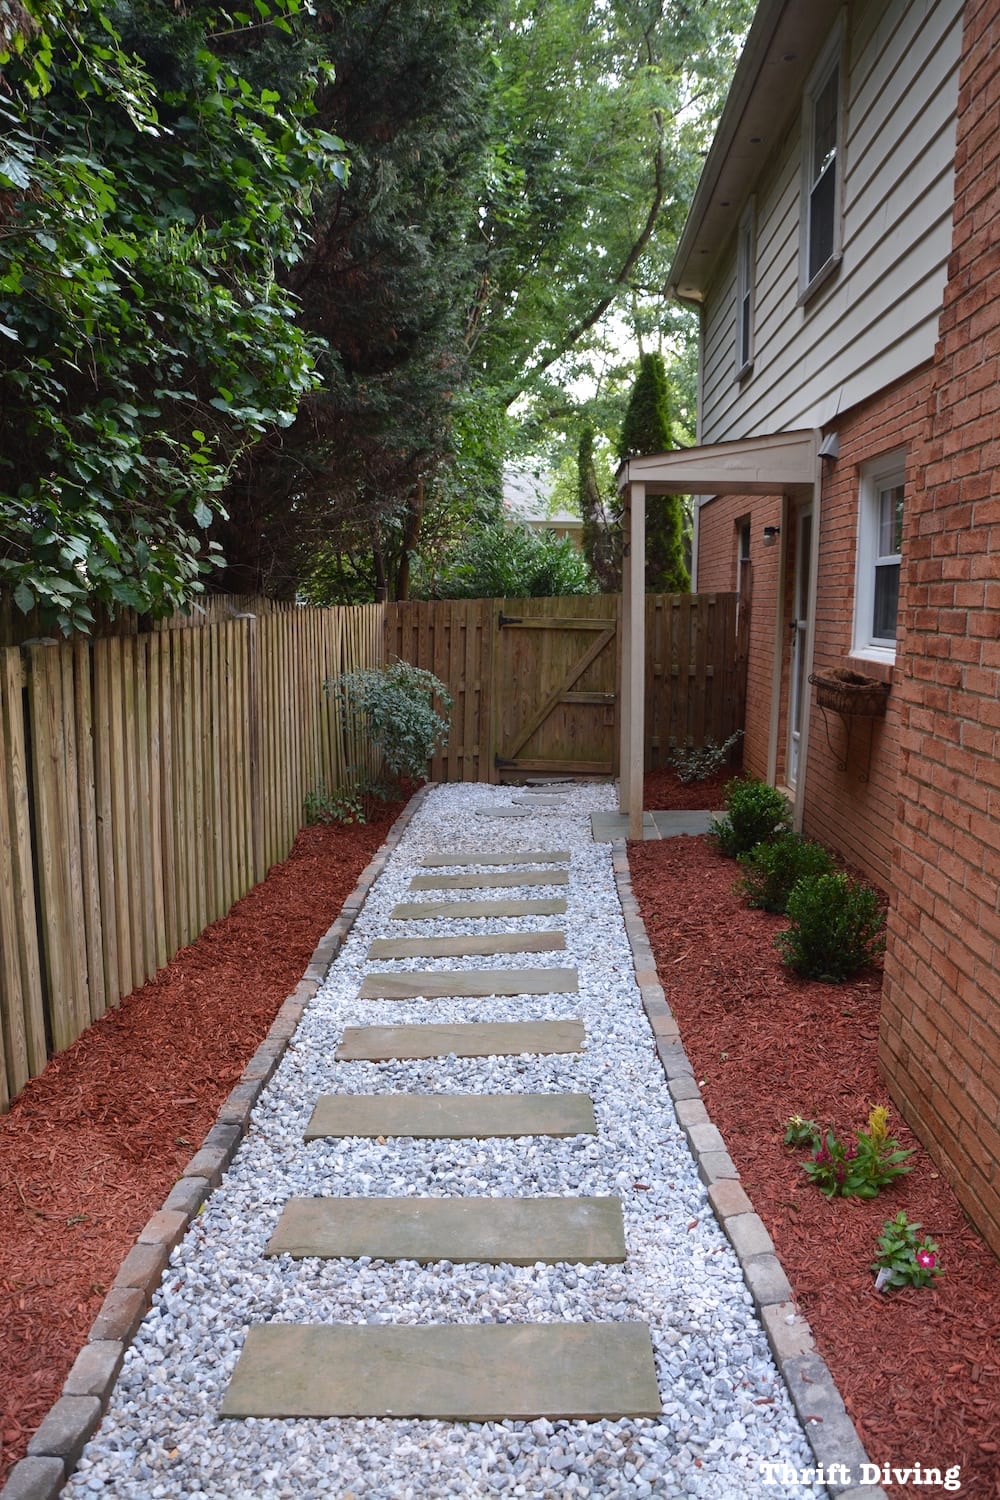 DIY walkway using stones and mulch. - Thrift Diving